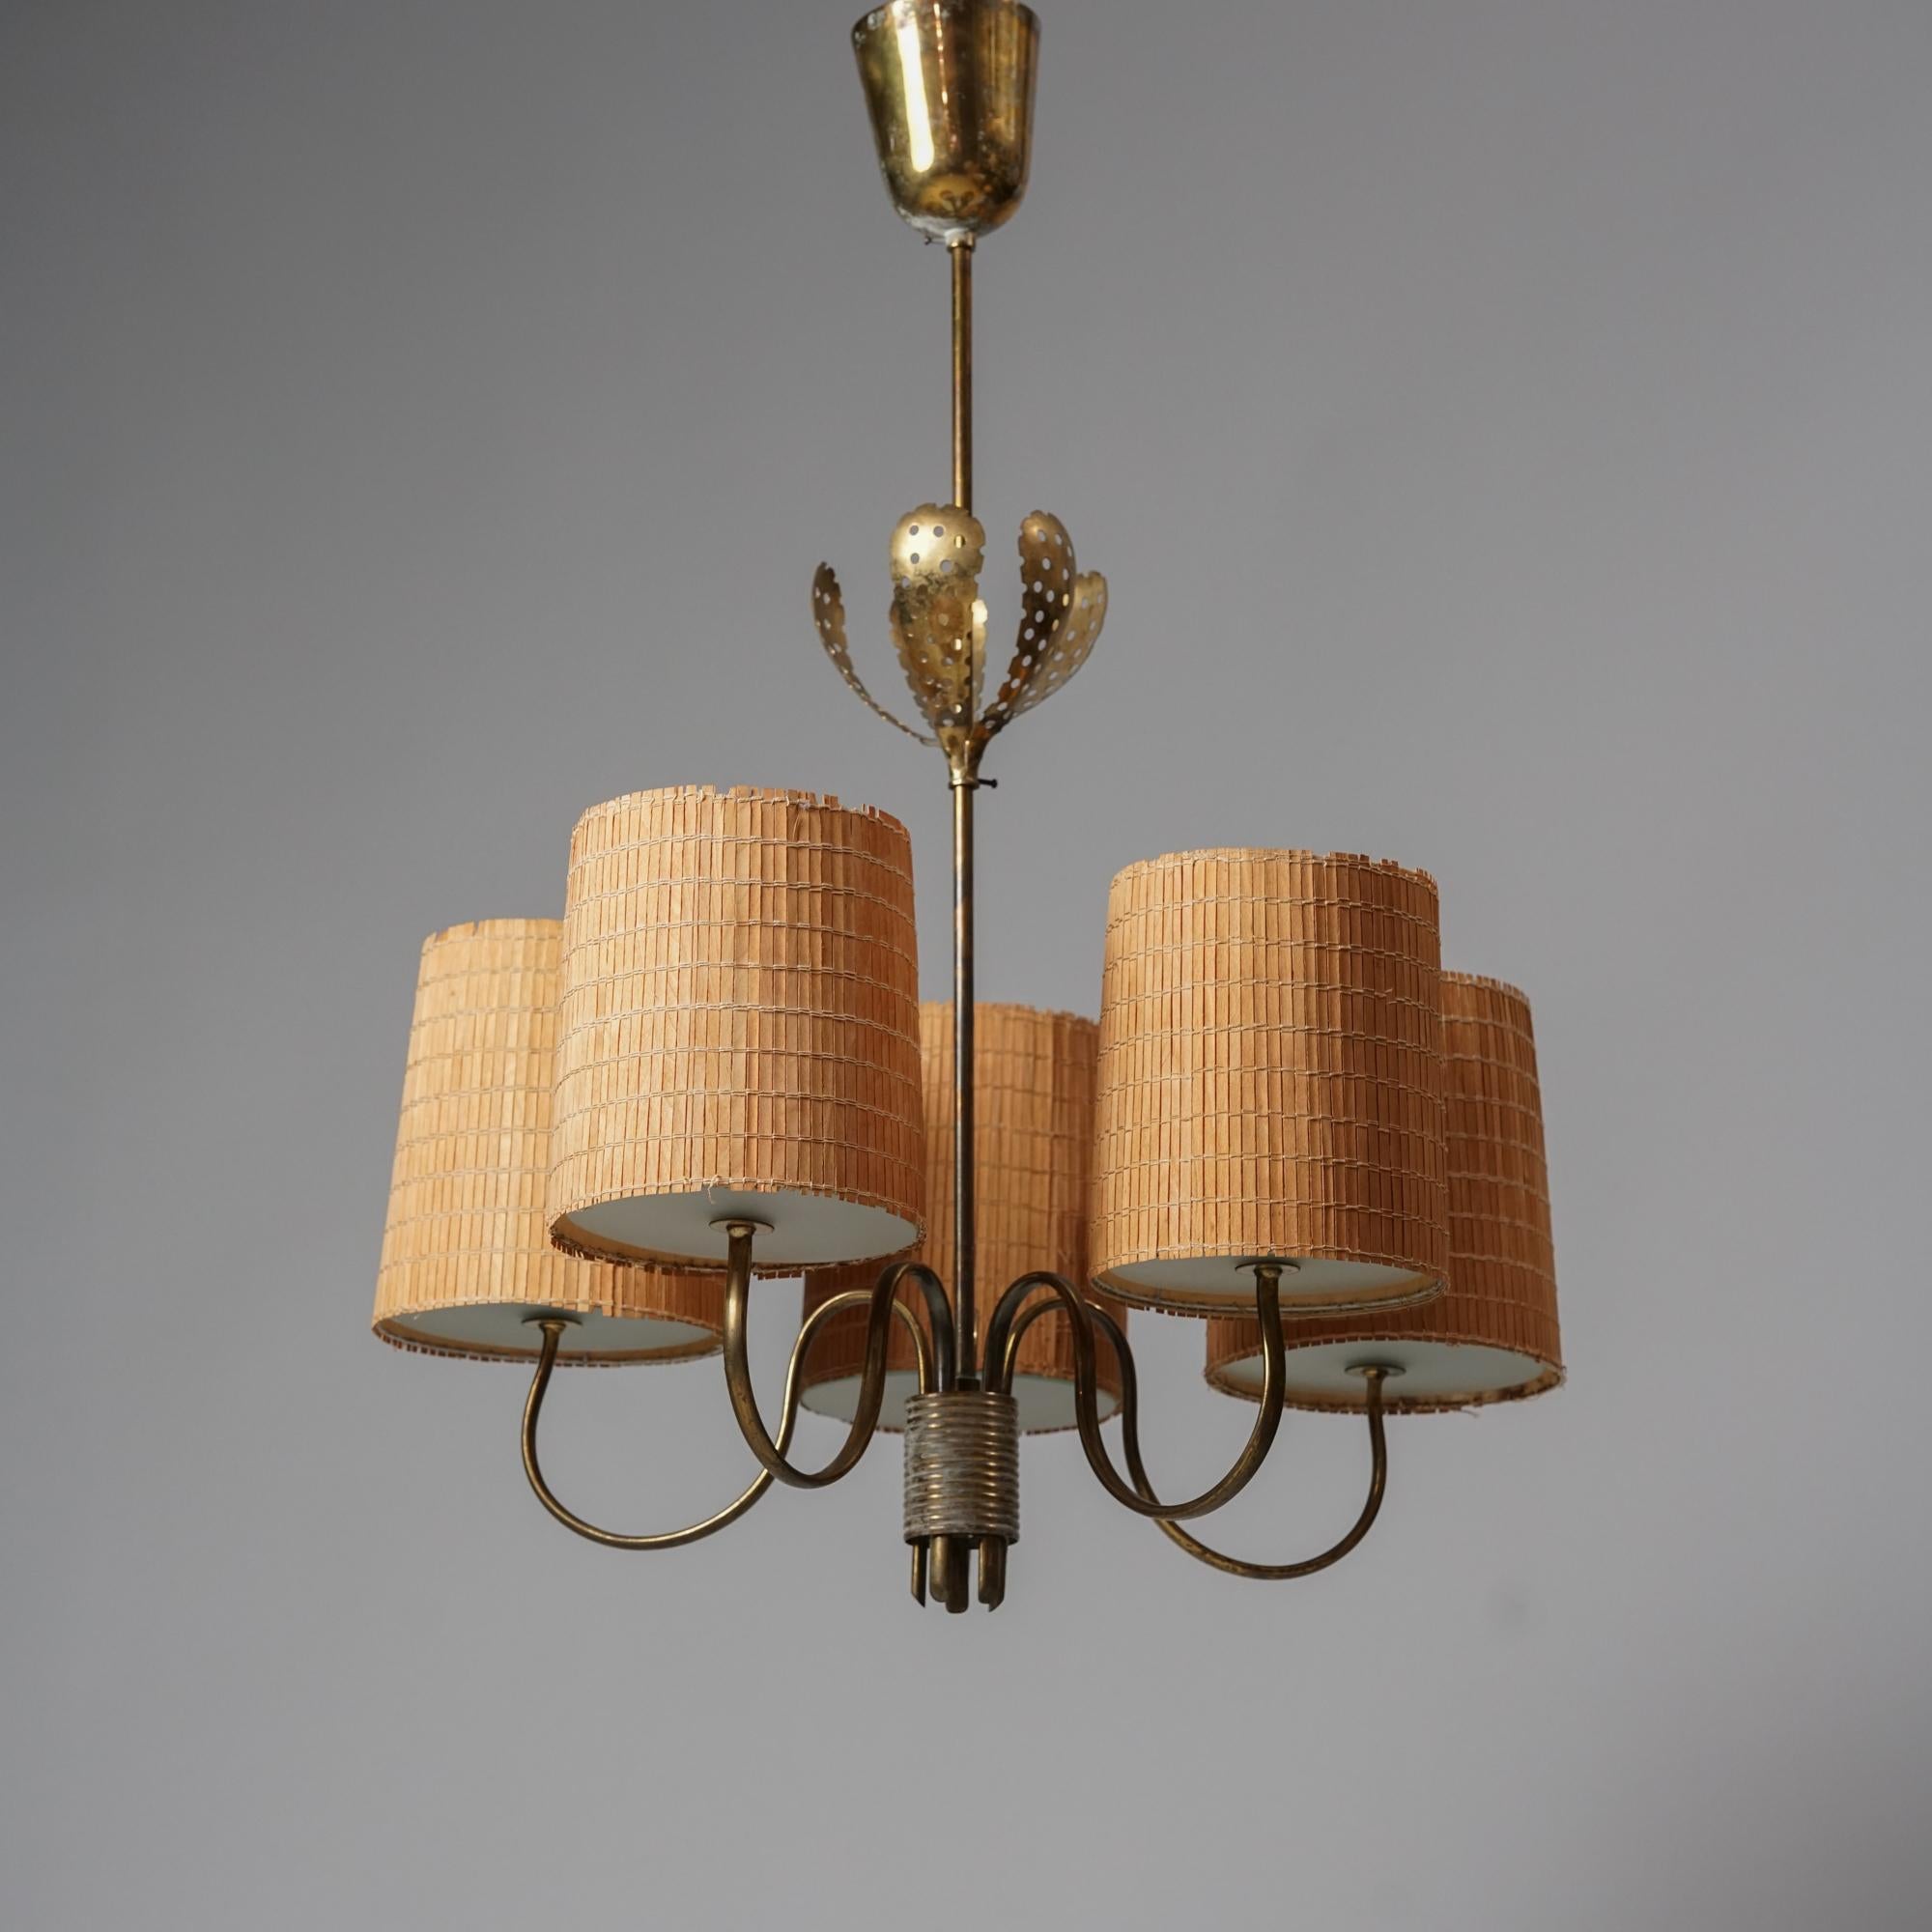 Pendant model 9030 designed by Paavo Tynell for Taito Oy. From the  1940s/1950s. Brass frame with glass and rattan lampshades. Good vintage condition, minor patina consistent with age and use. Classic Scandinavian Modern piece by Paavo Tynell. 